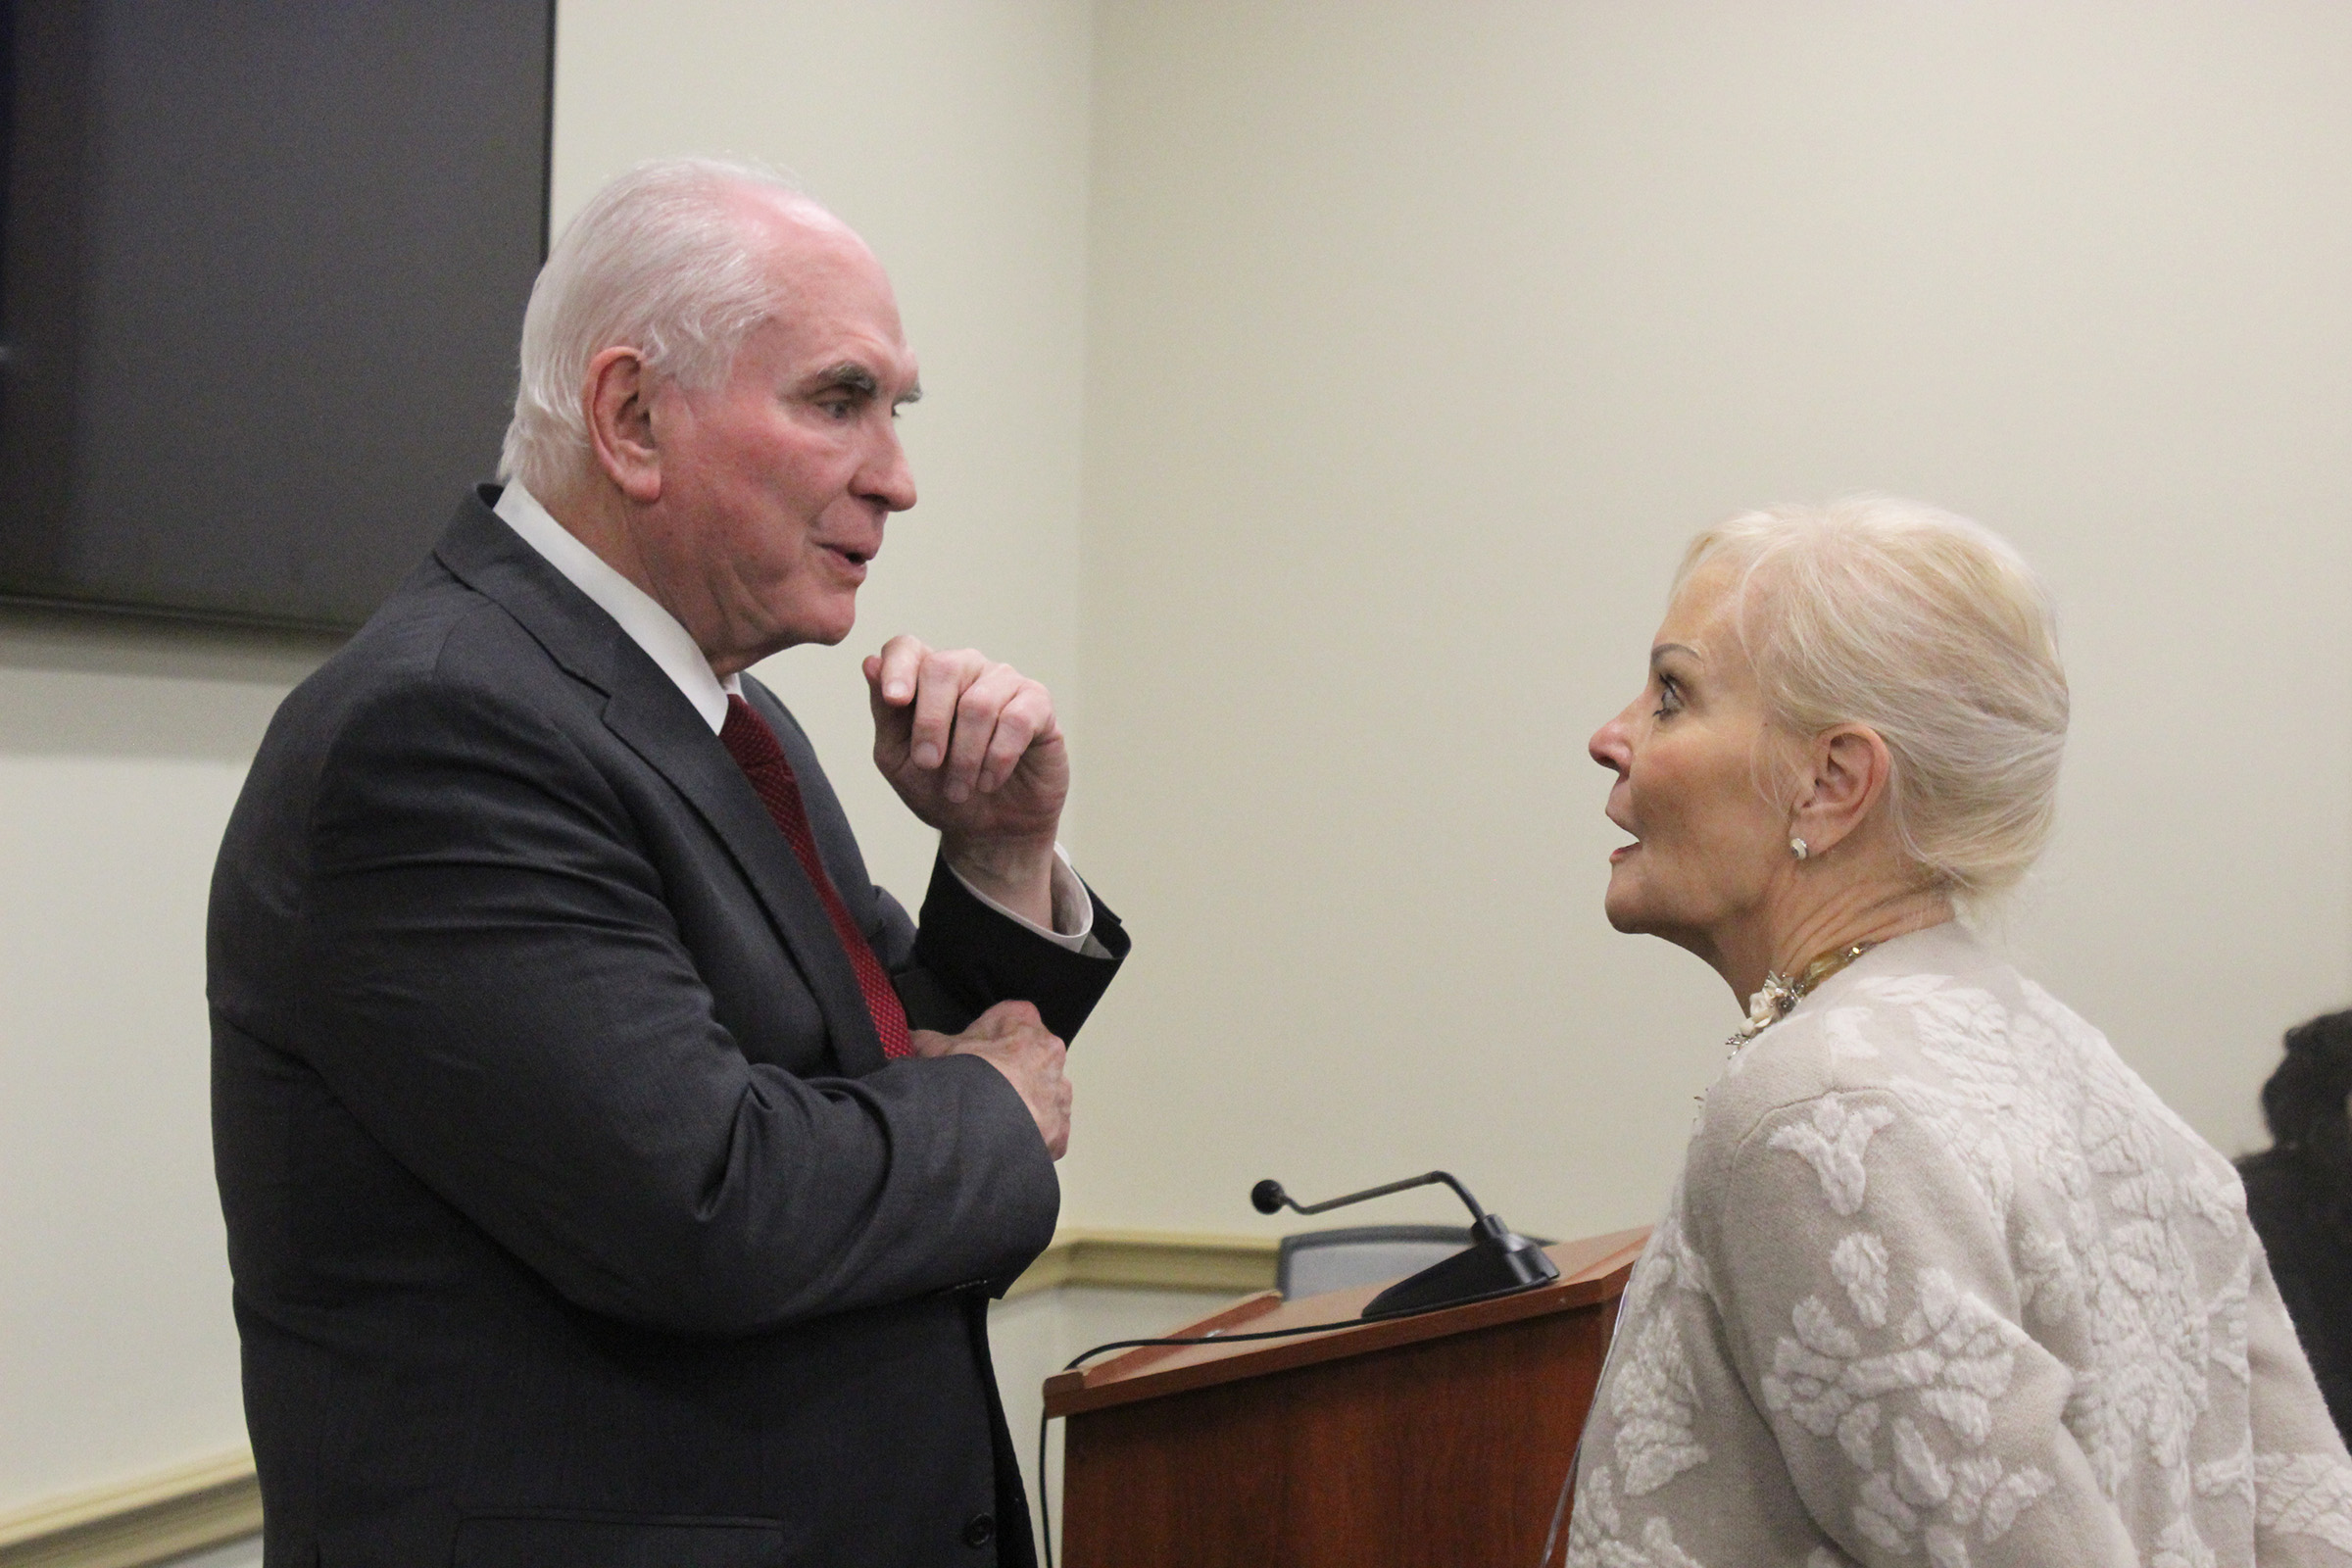 Rep. Mike Kelly (R-PA) deep in conversation with Stephanie Powers